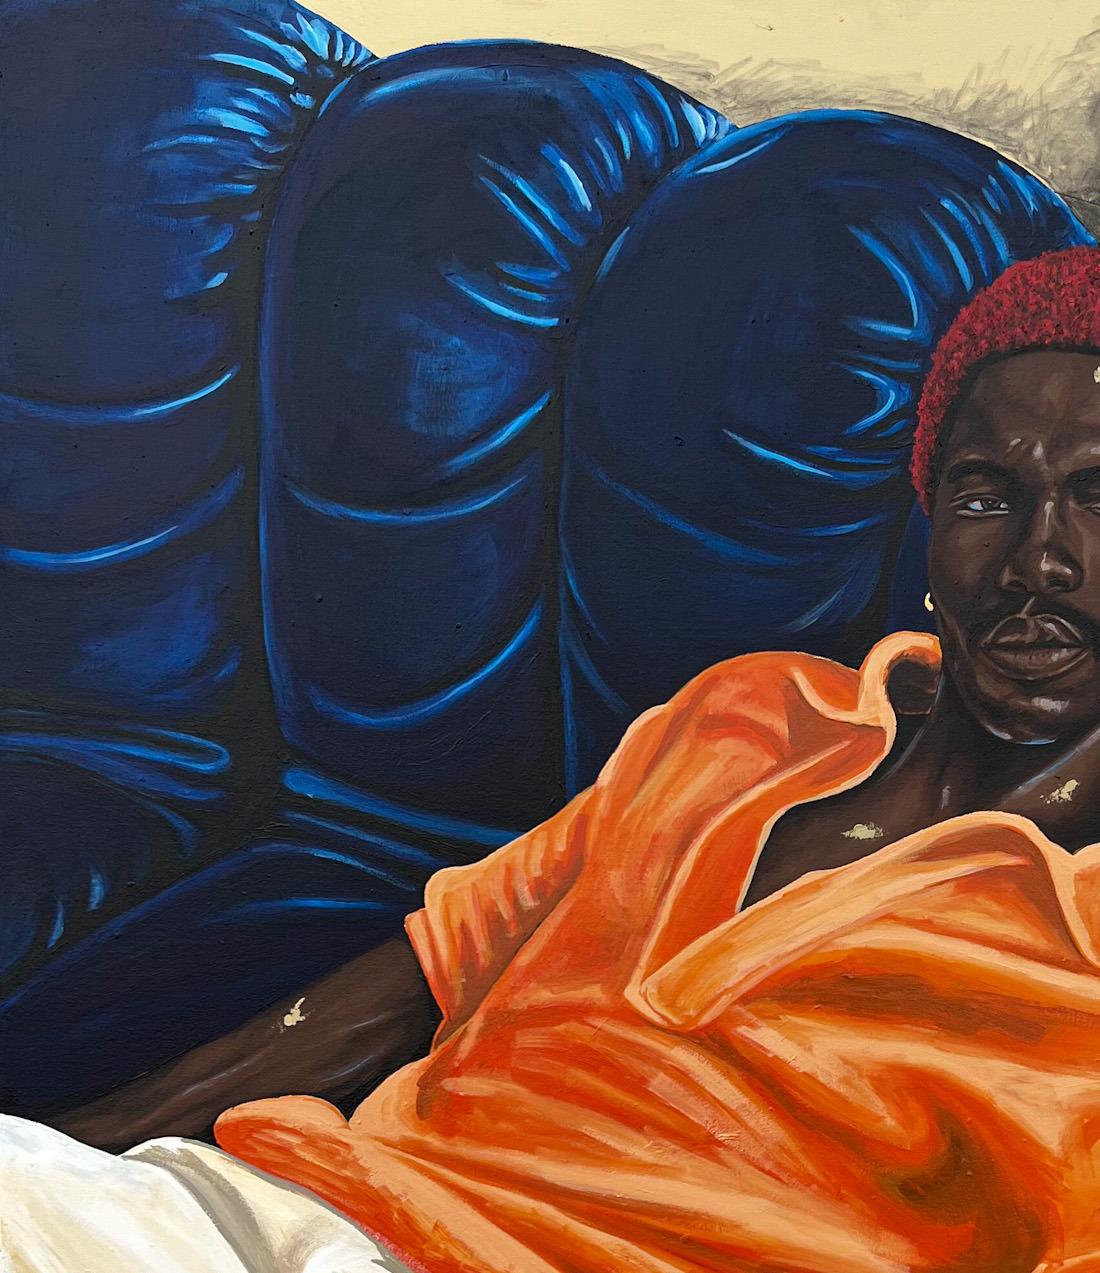 Comfortable Within - Painting by Eyitayo Alagbe 